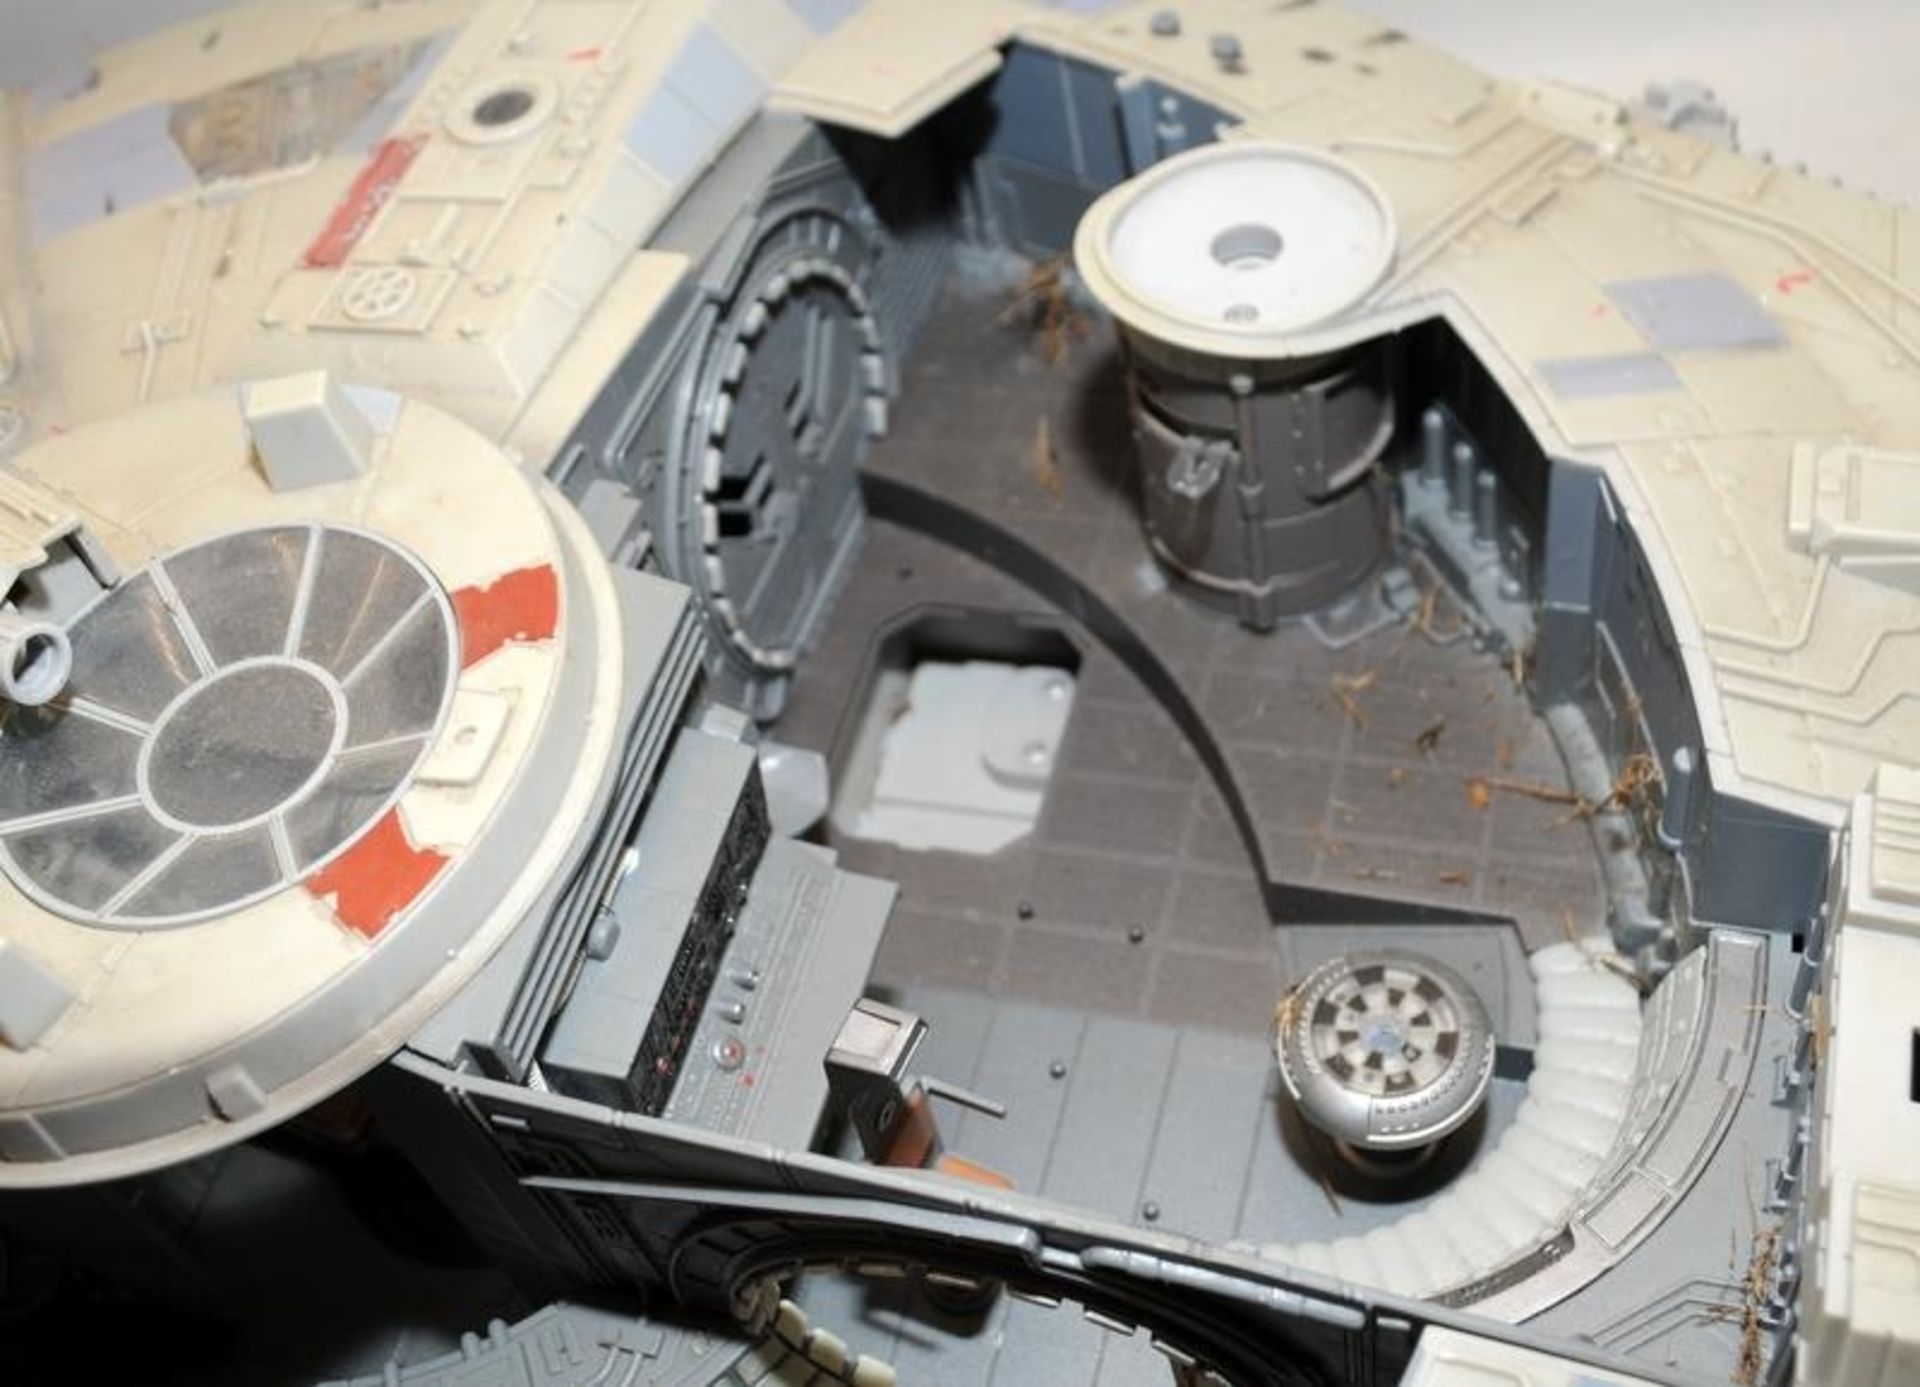 Hasbro Legacy Star Wars Millennium Falcon. Large Scale detailed model, mostly complete but missing - Image 6 of 8